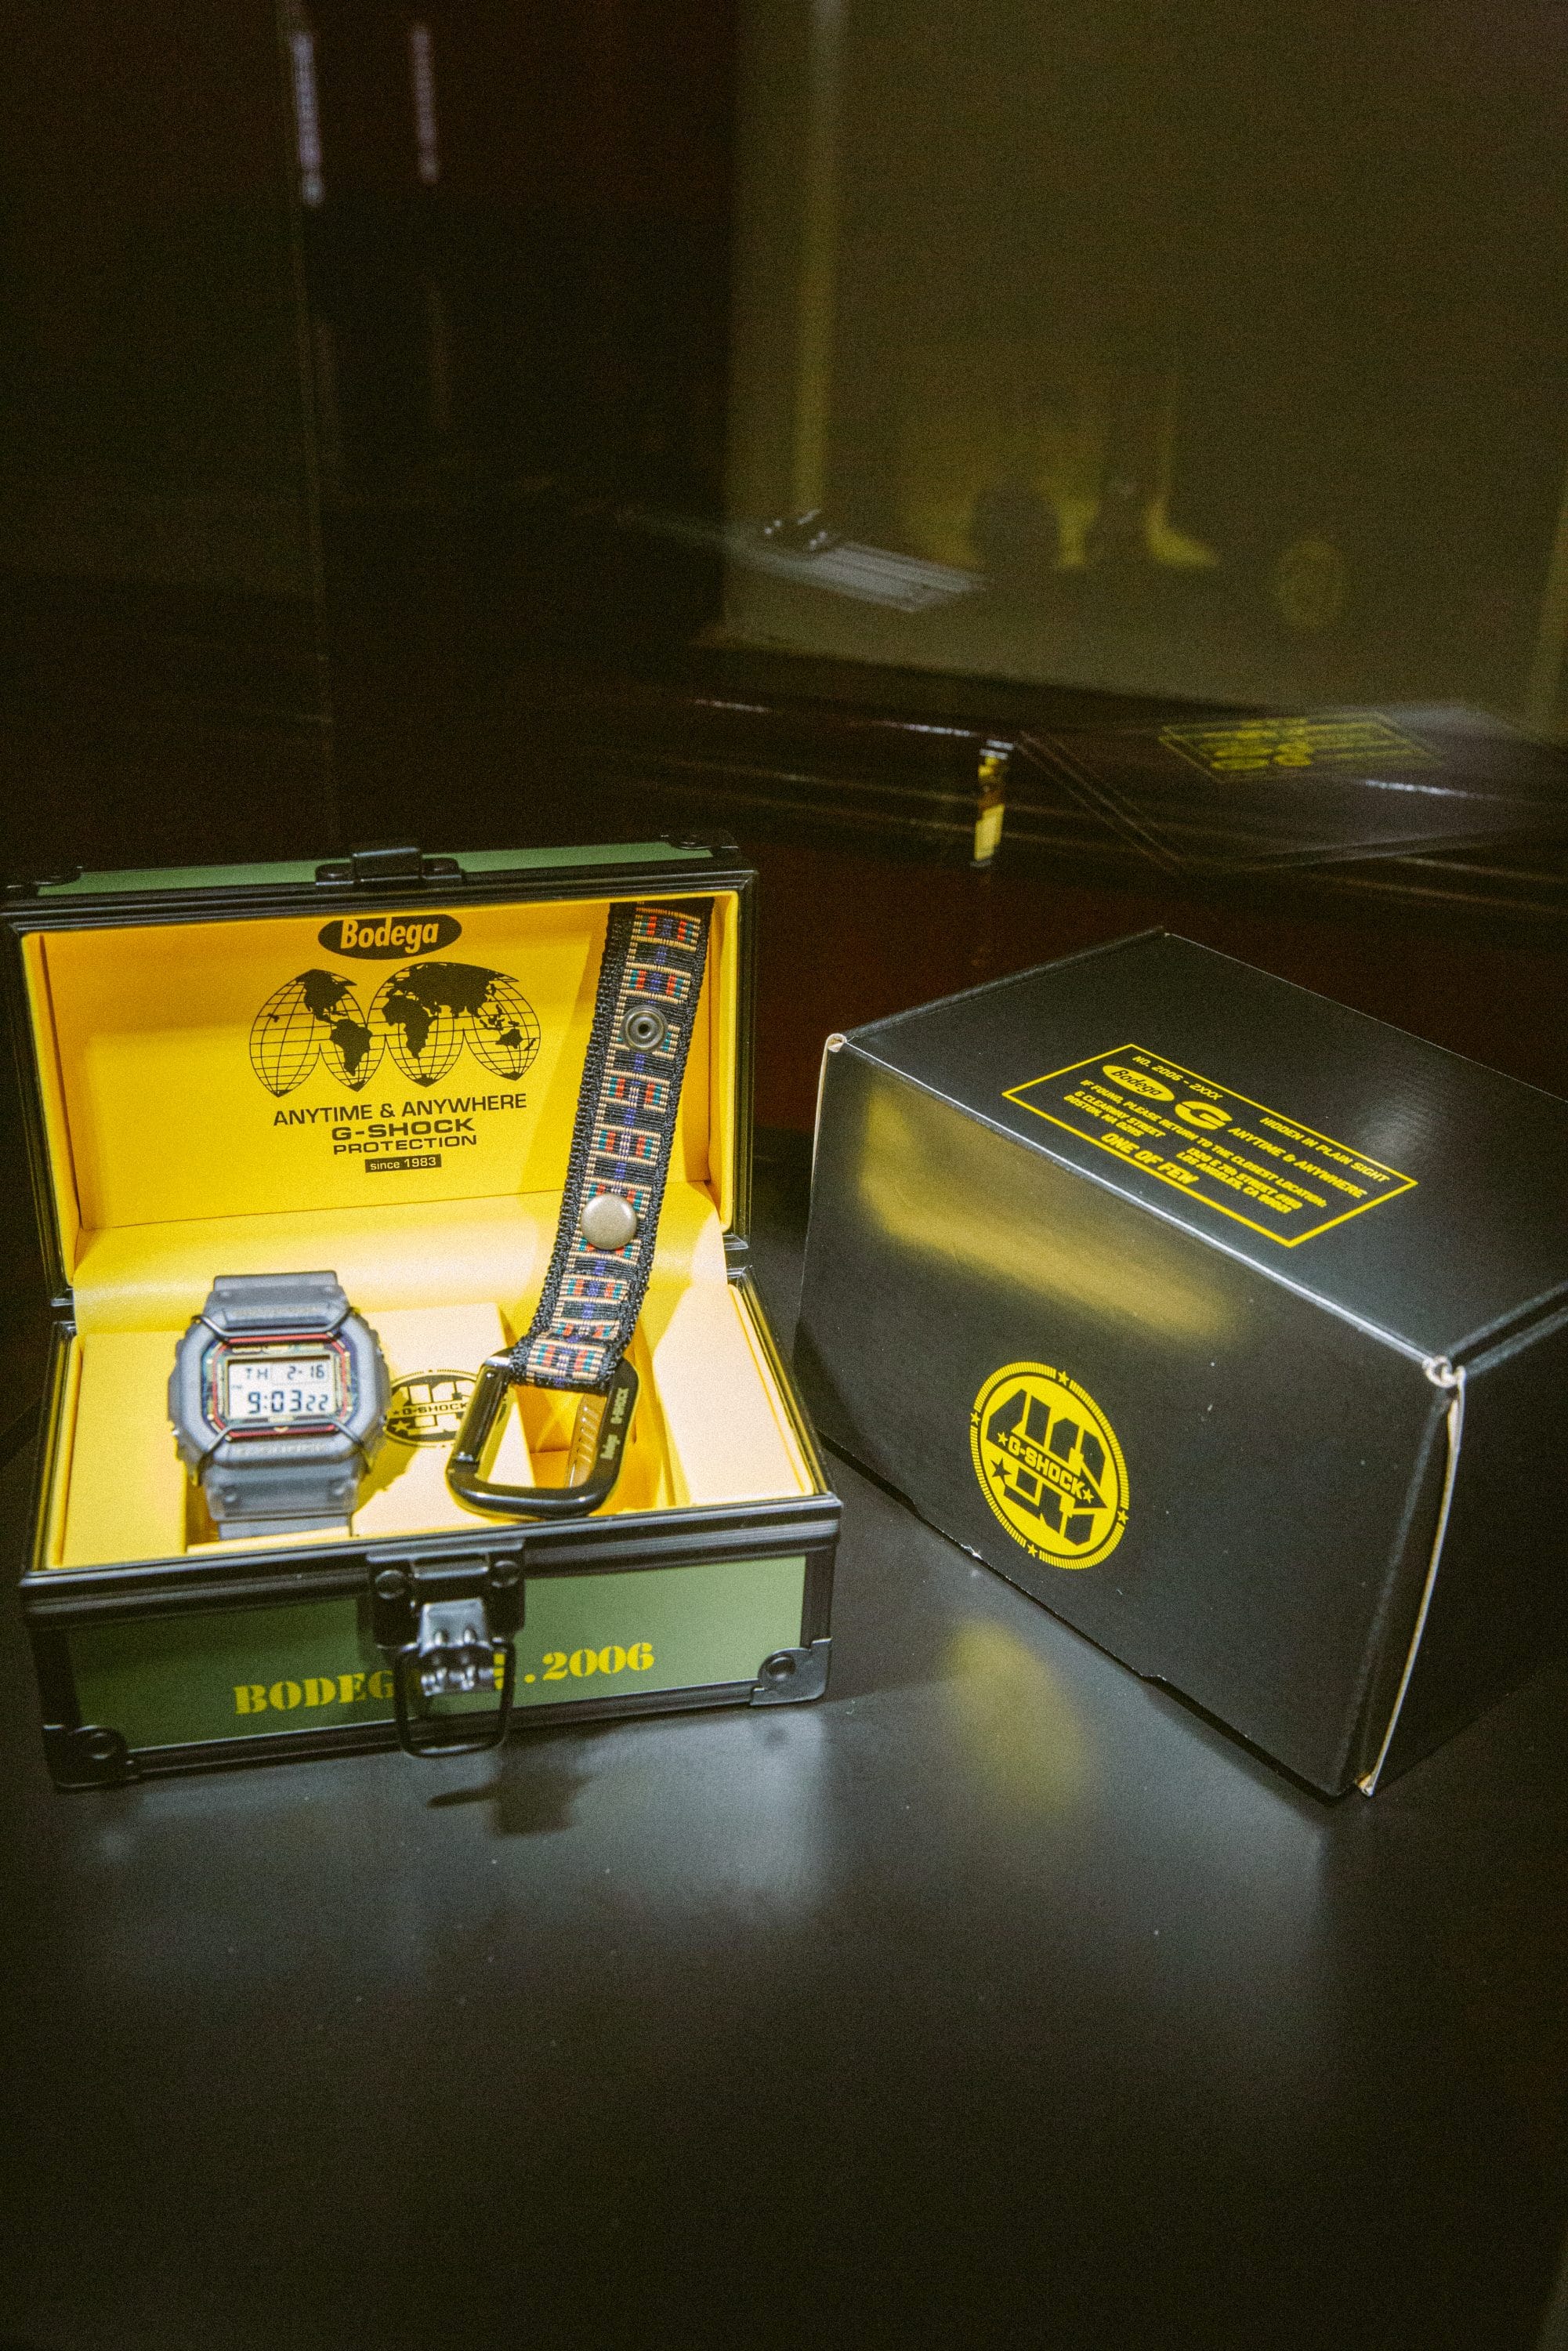 Shot of the Bodega x G-SHOCK DW5600BDG23-1 watch and accessories presented in the special packaging and outer box